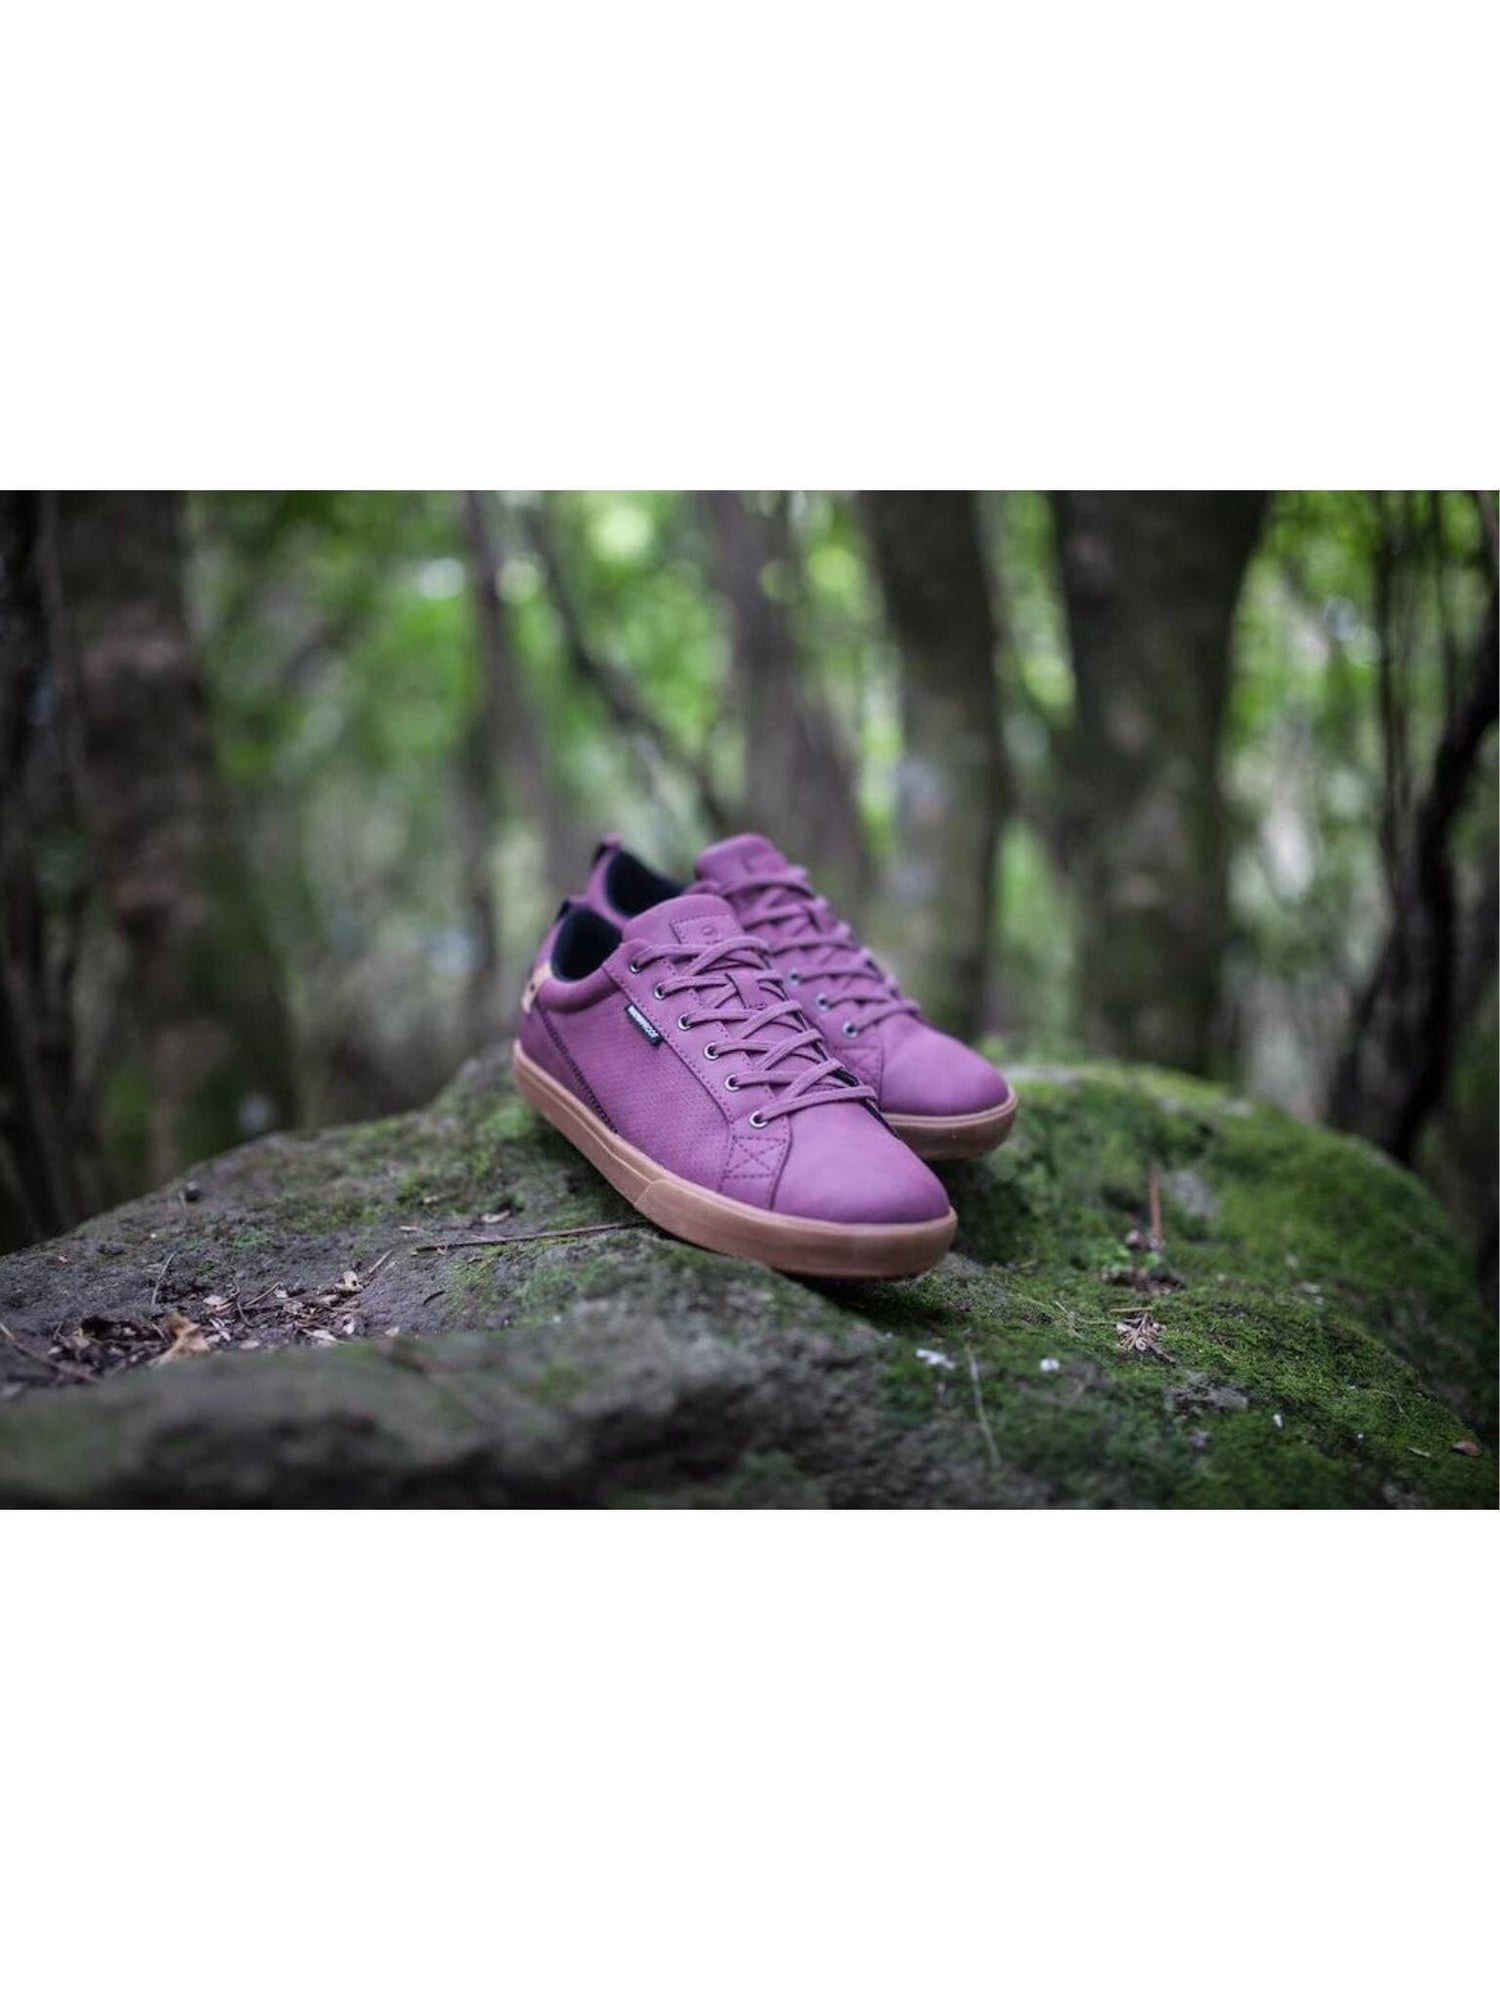 Saola - W's Cannon Waterproof Sneakers - Recycled PET and bio-sourced materials - Weekendbee - sustainable sportswear